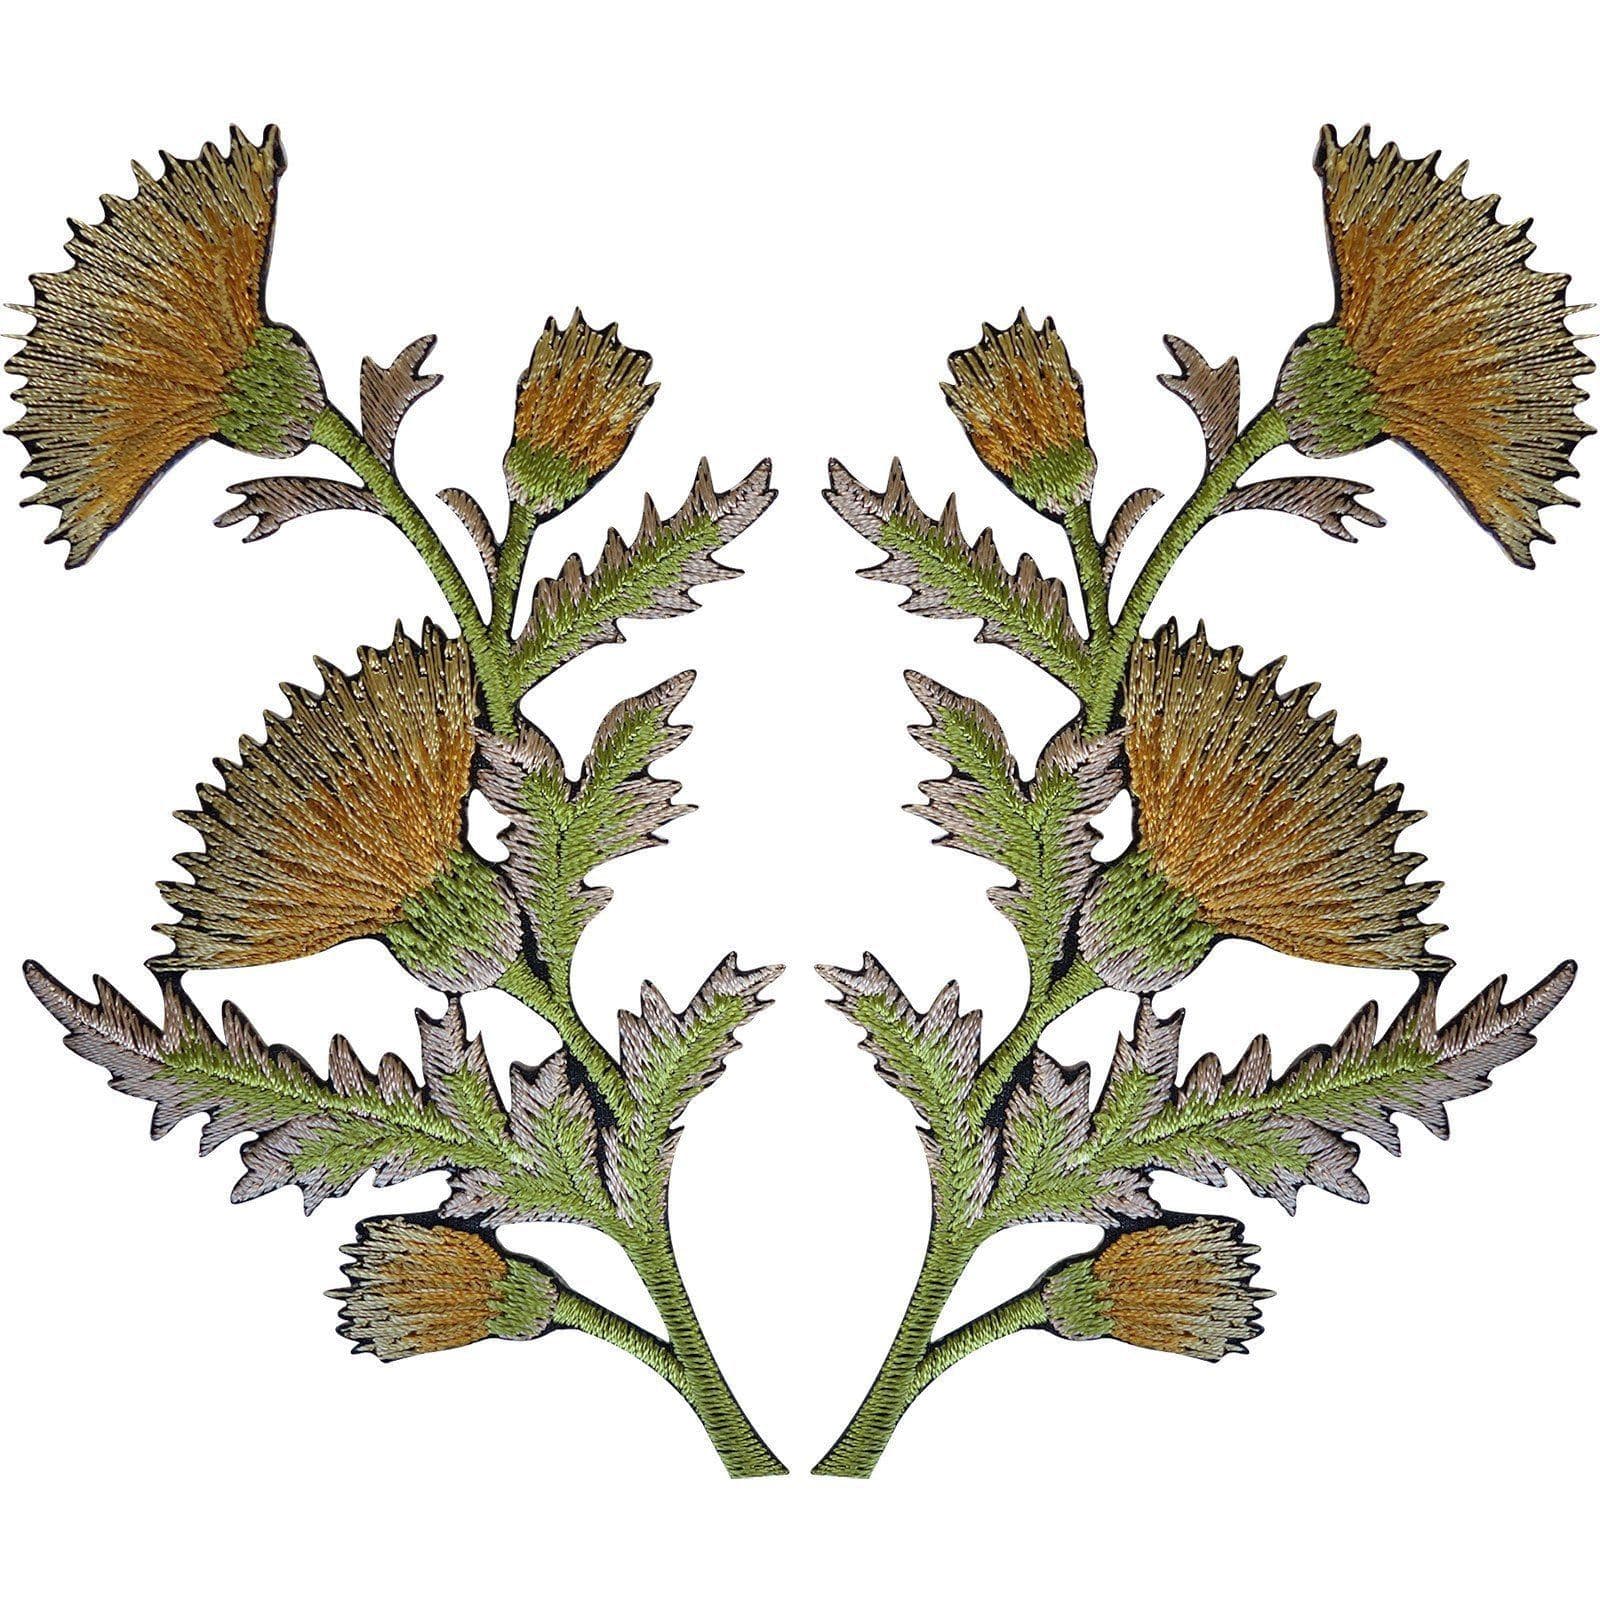 Pair of Gold Thistle Flower Patches Iron Sew On Embroidered Patch Badge Flowers